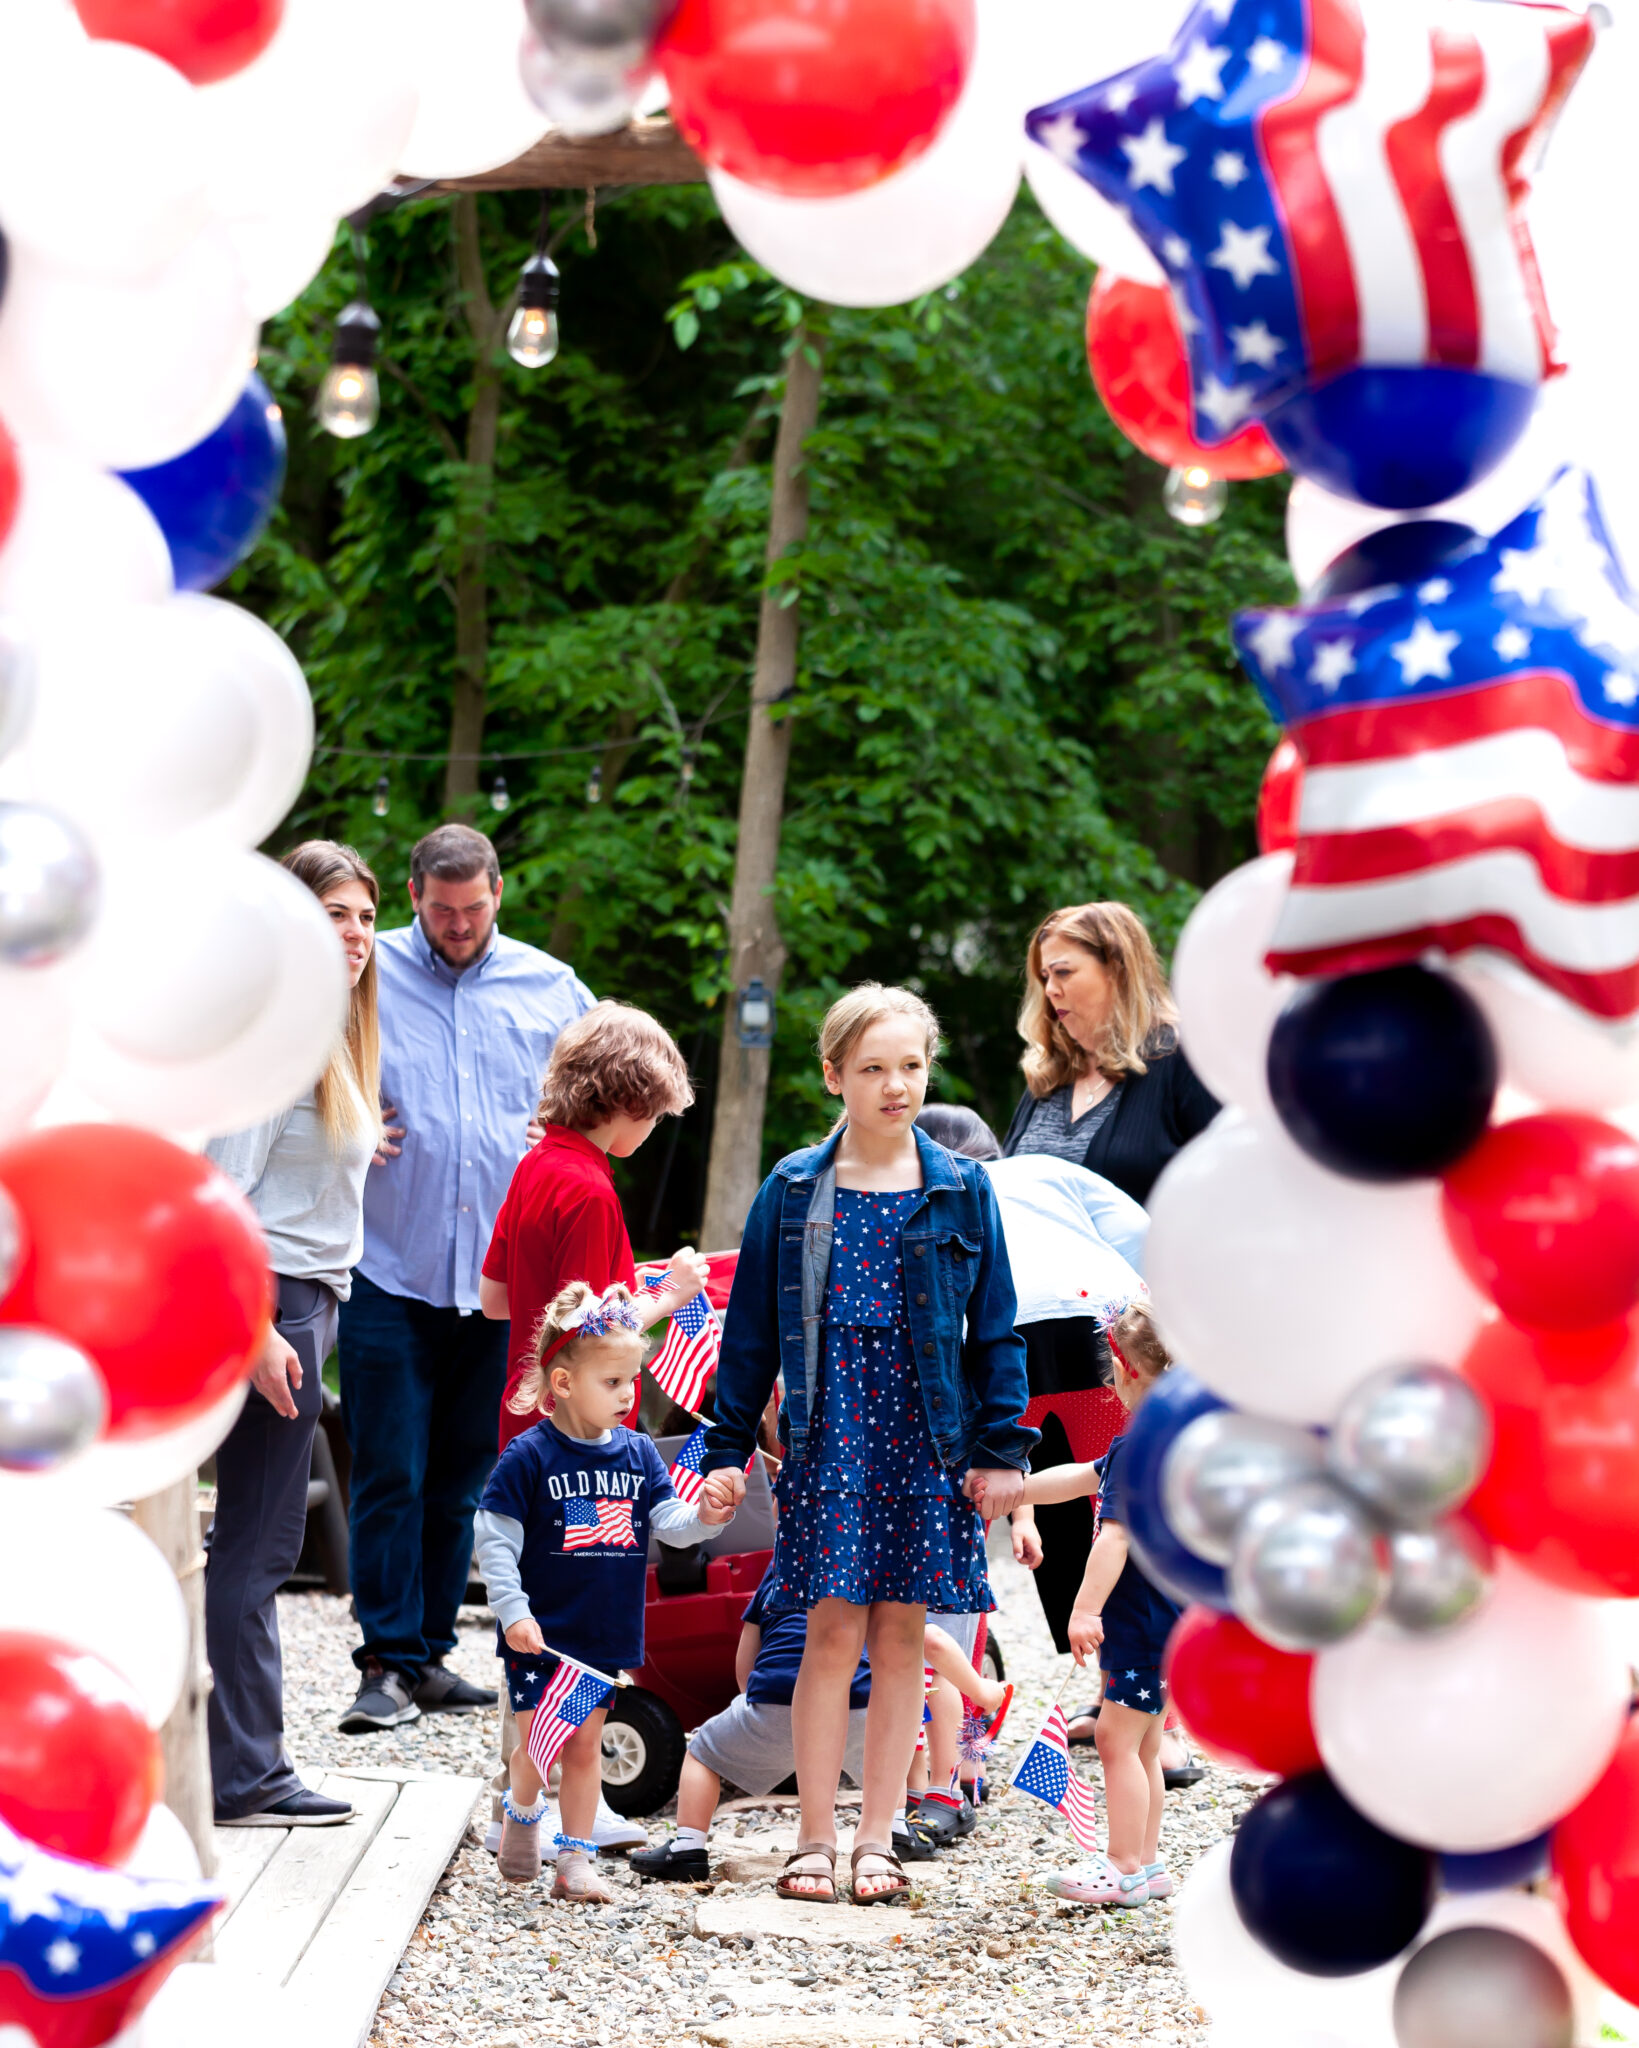 Children march under a patriotic arch of balloons